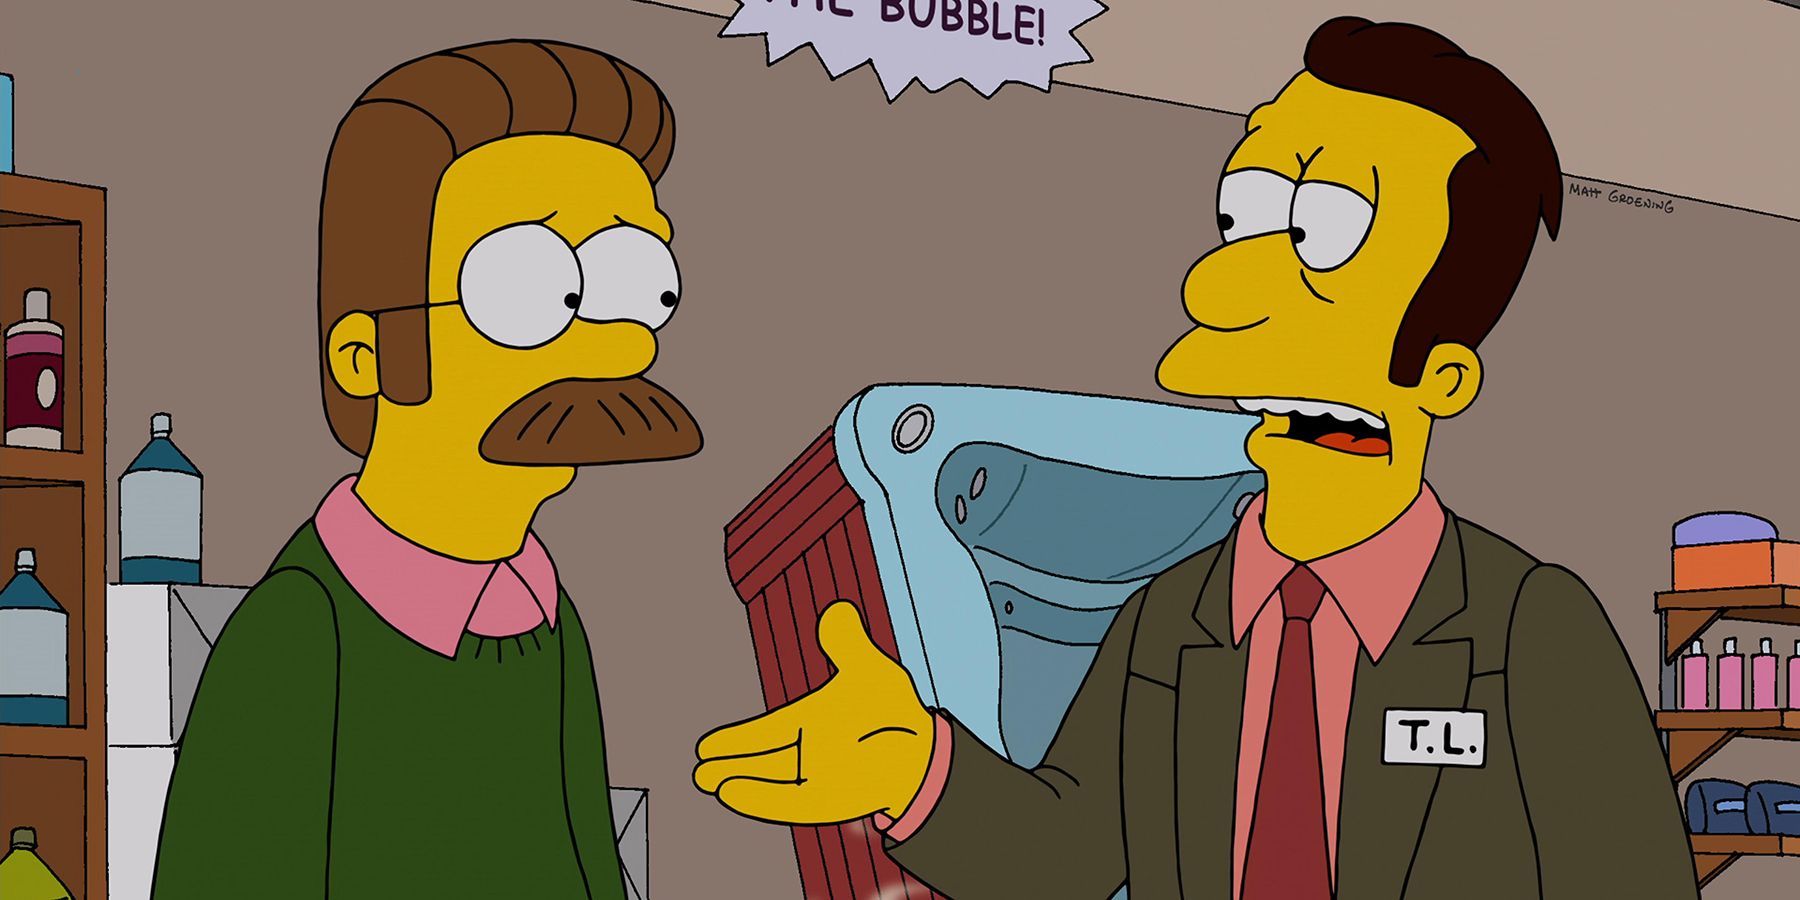 Ned Flanders is, perhaps, the only genuinely well-meaning, good-natured per...